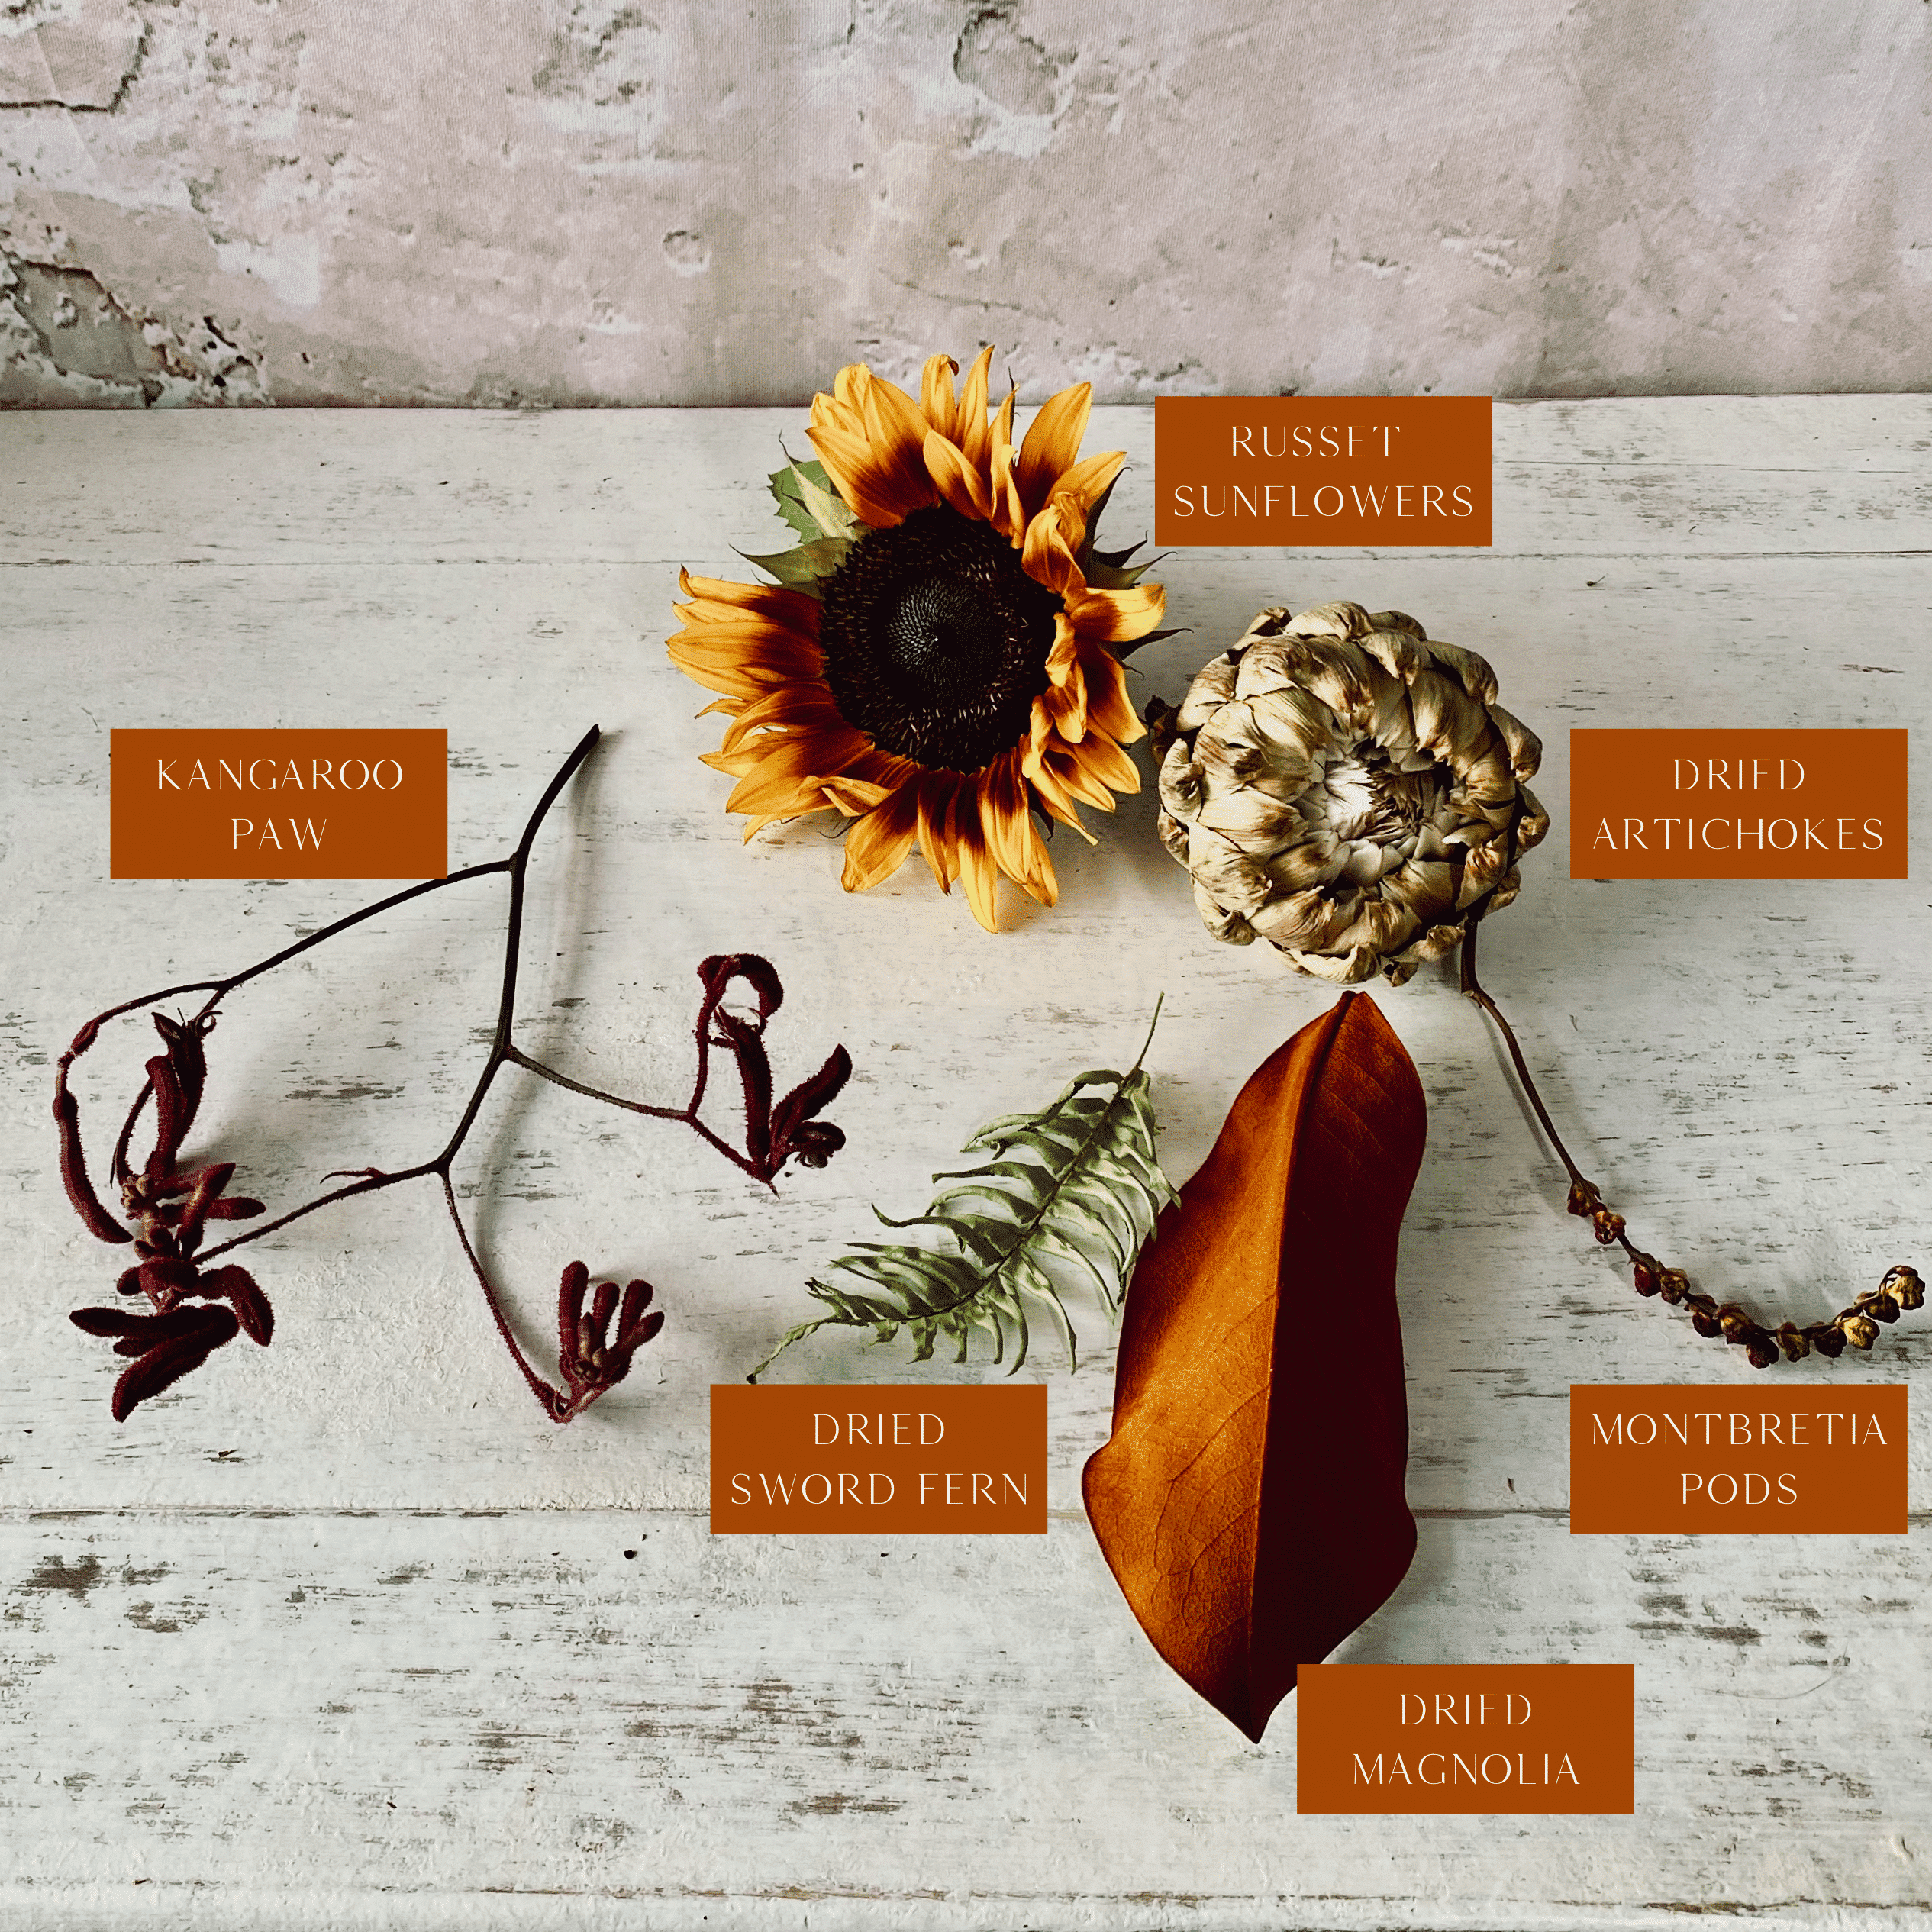 infographic outlining all the floral elements used in this design. Russet sunflowers, kangaroo paw, dried artichoke, dried sword fern, dried magnolia, and montbretia pods